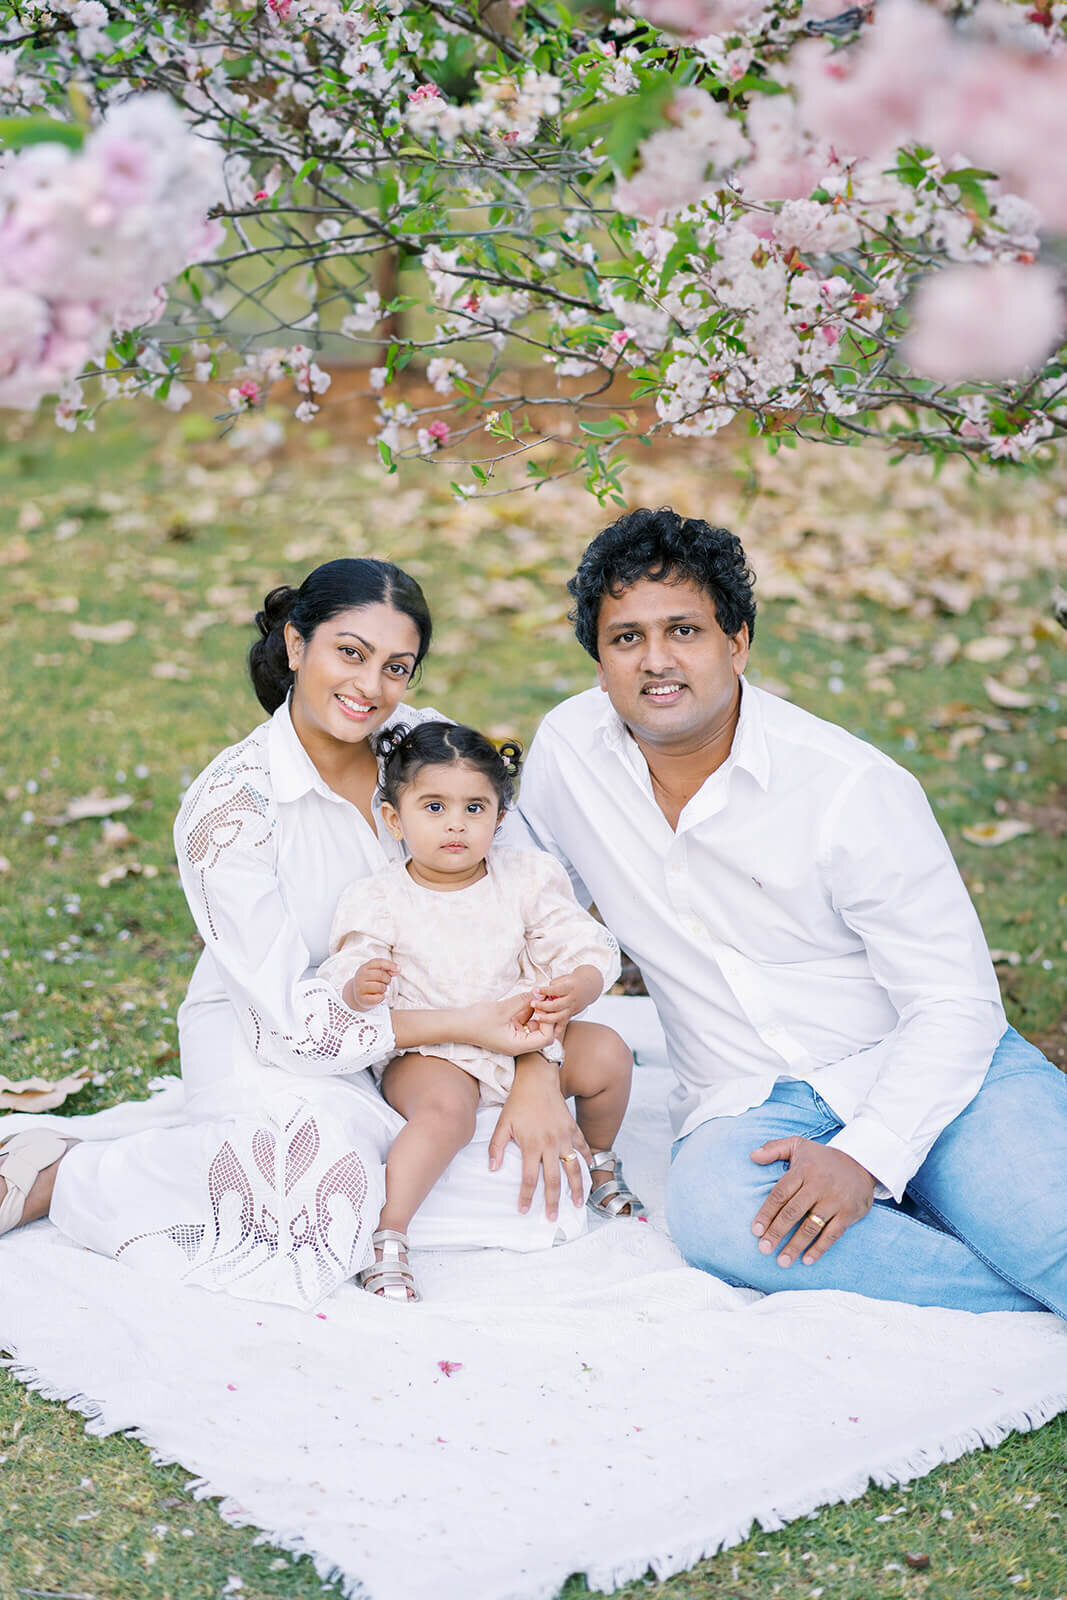 In a sea of cherry blossoms, we cherish our baby's milestone in Gold Coast park celebrating one year birthday.